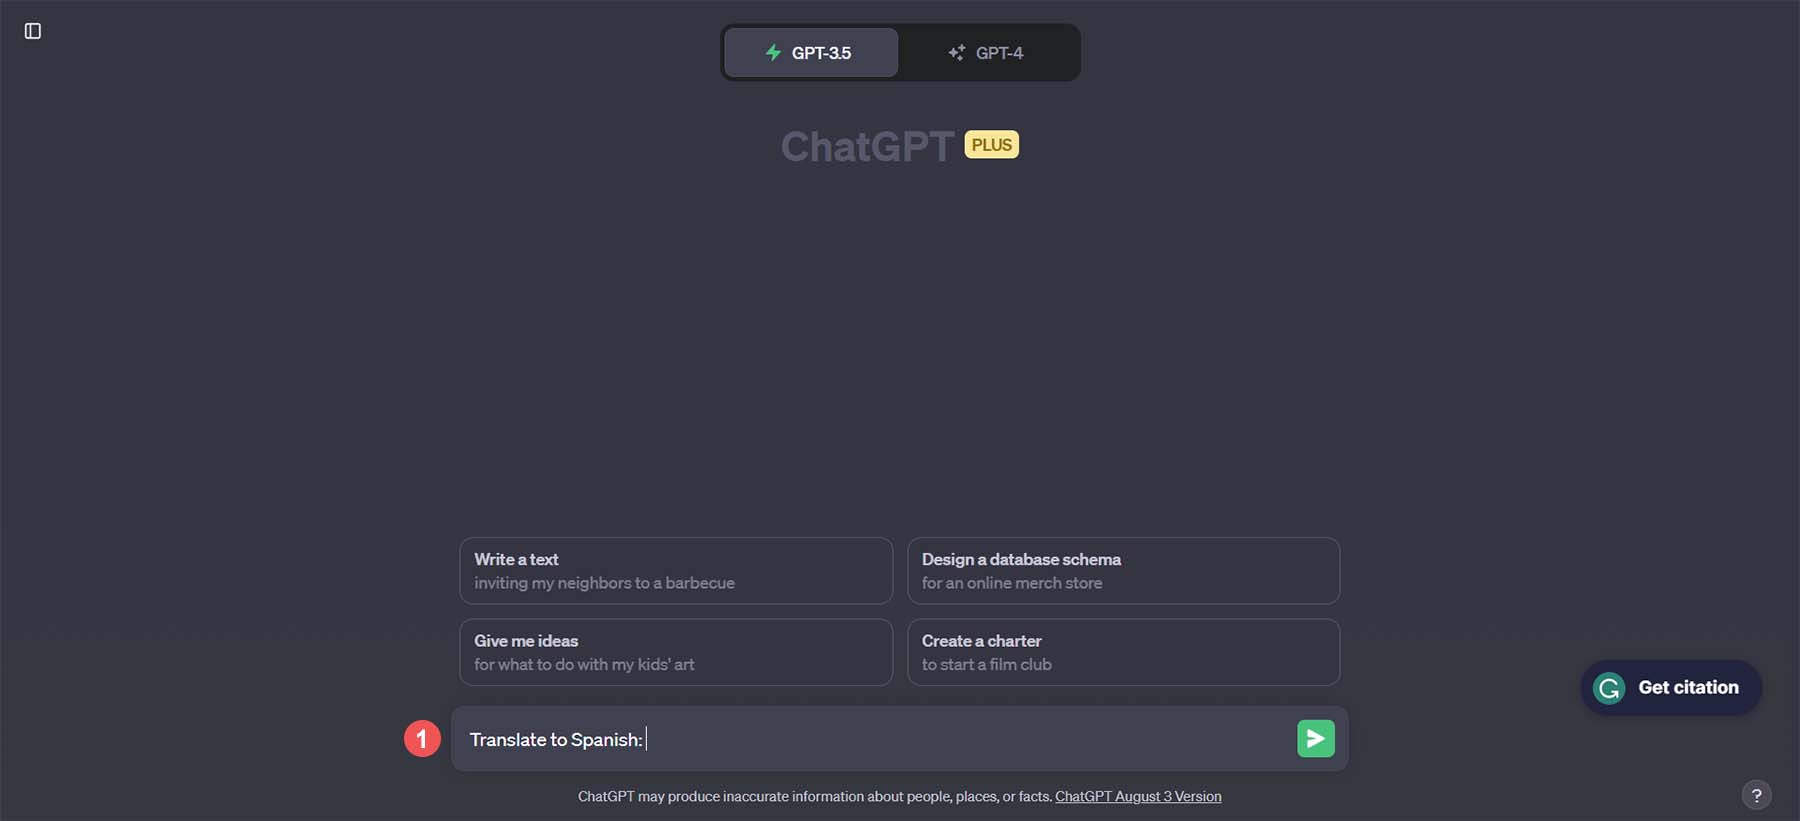 Enter your commands to translate your website copy to ChatGPT